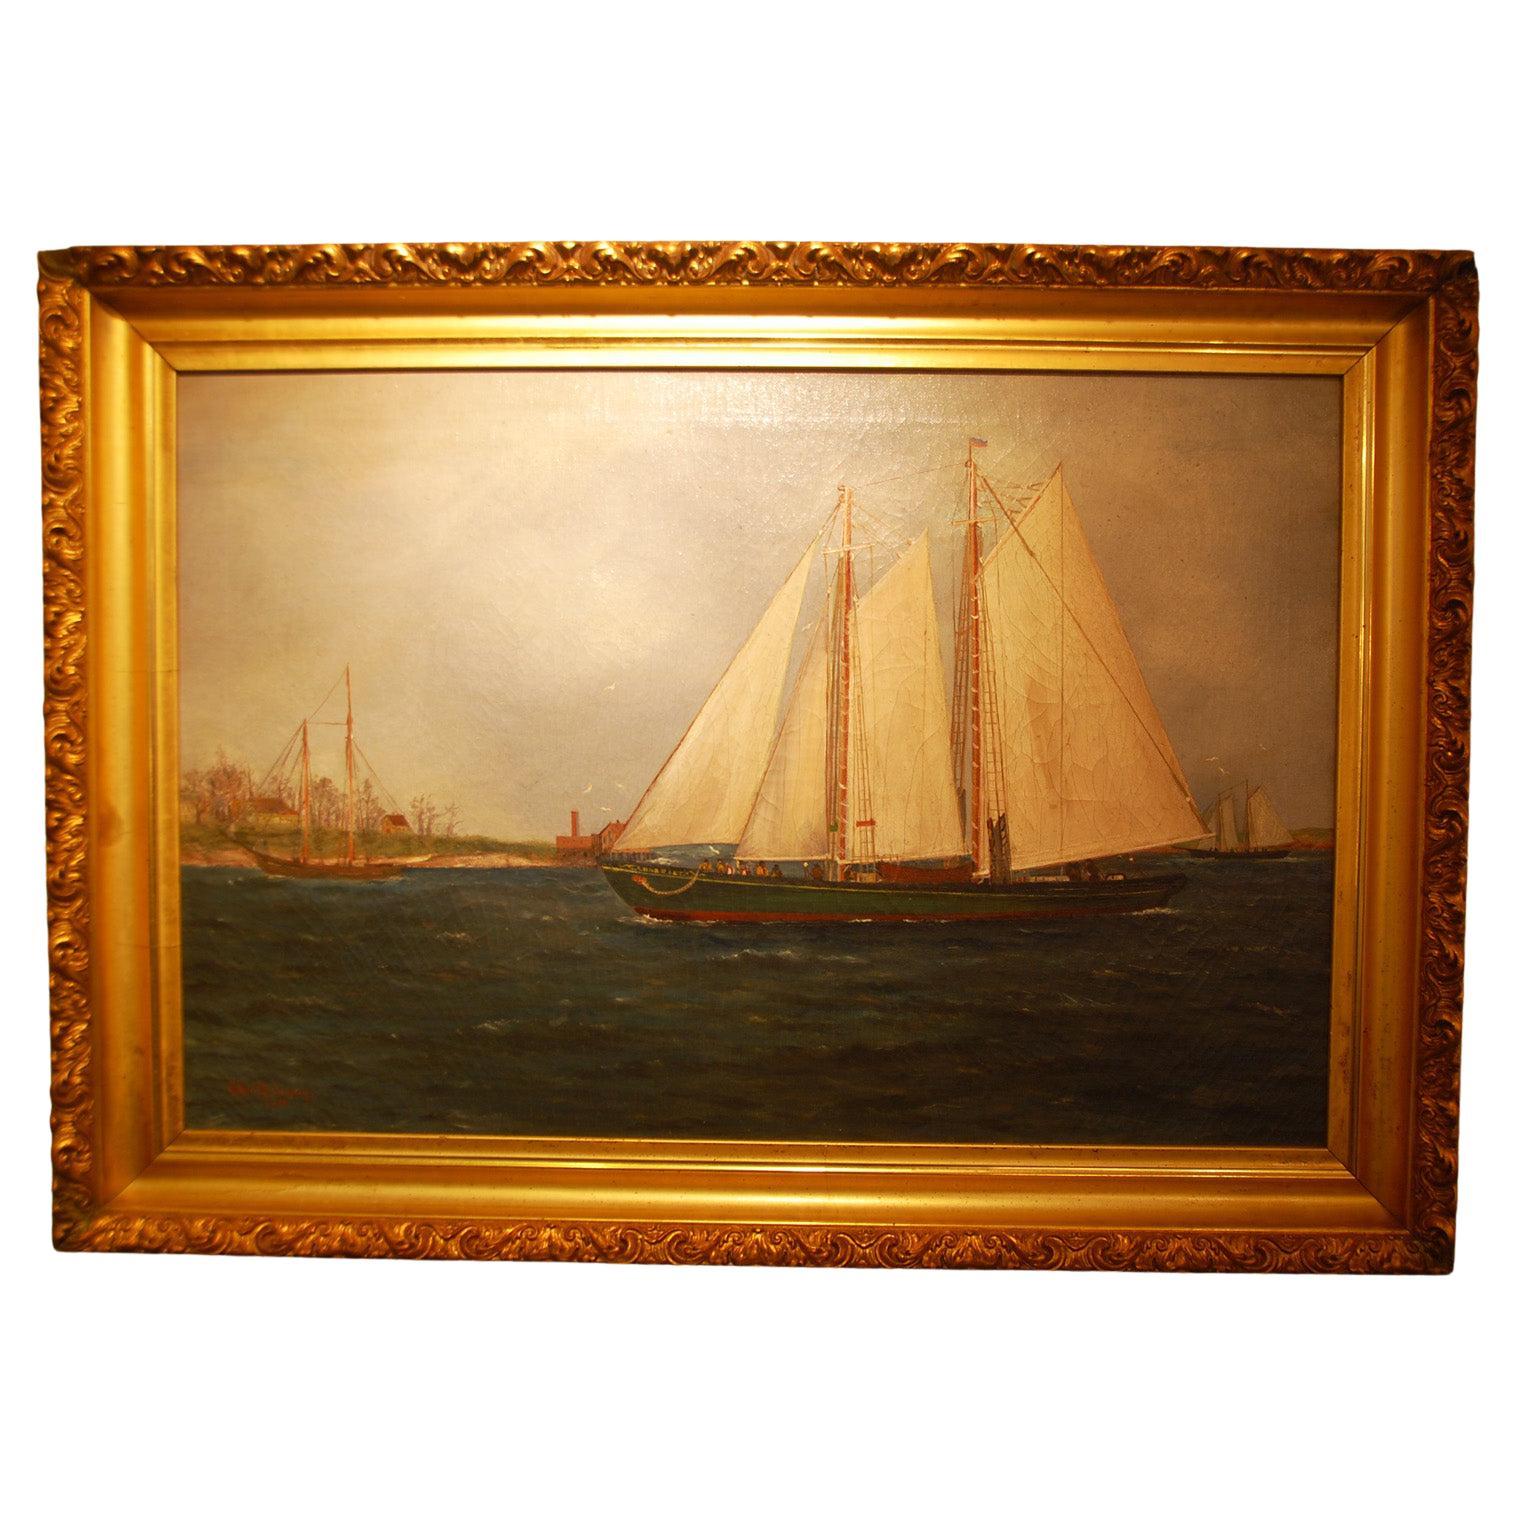 American E. A. Harvey Original Maritime Oil Painting on Canvas "The Harriet"